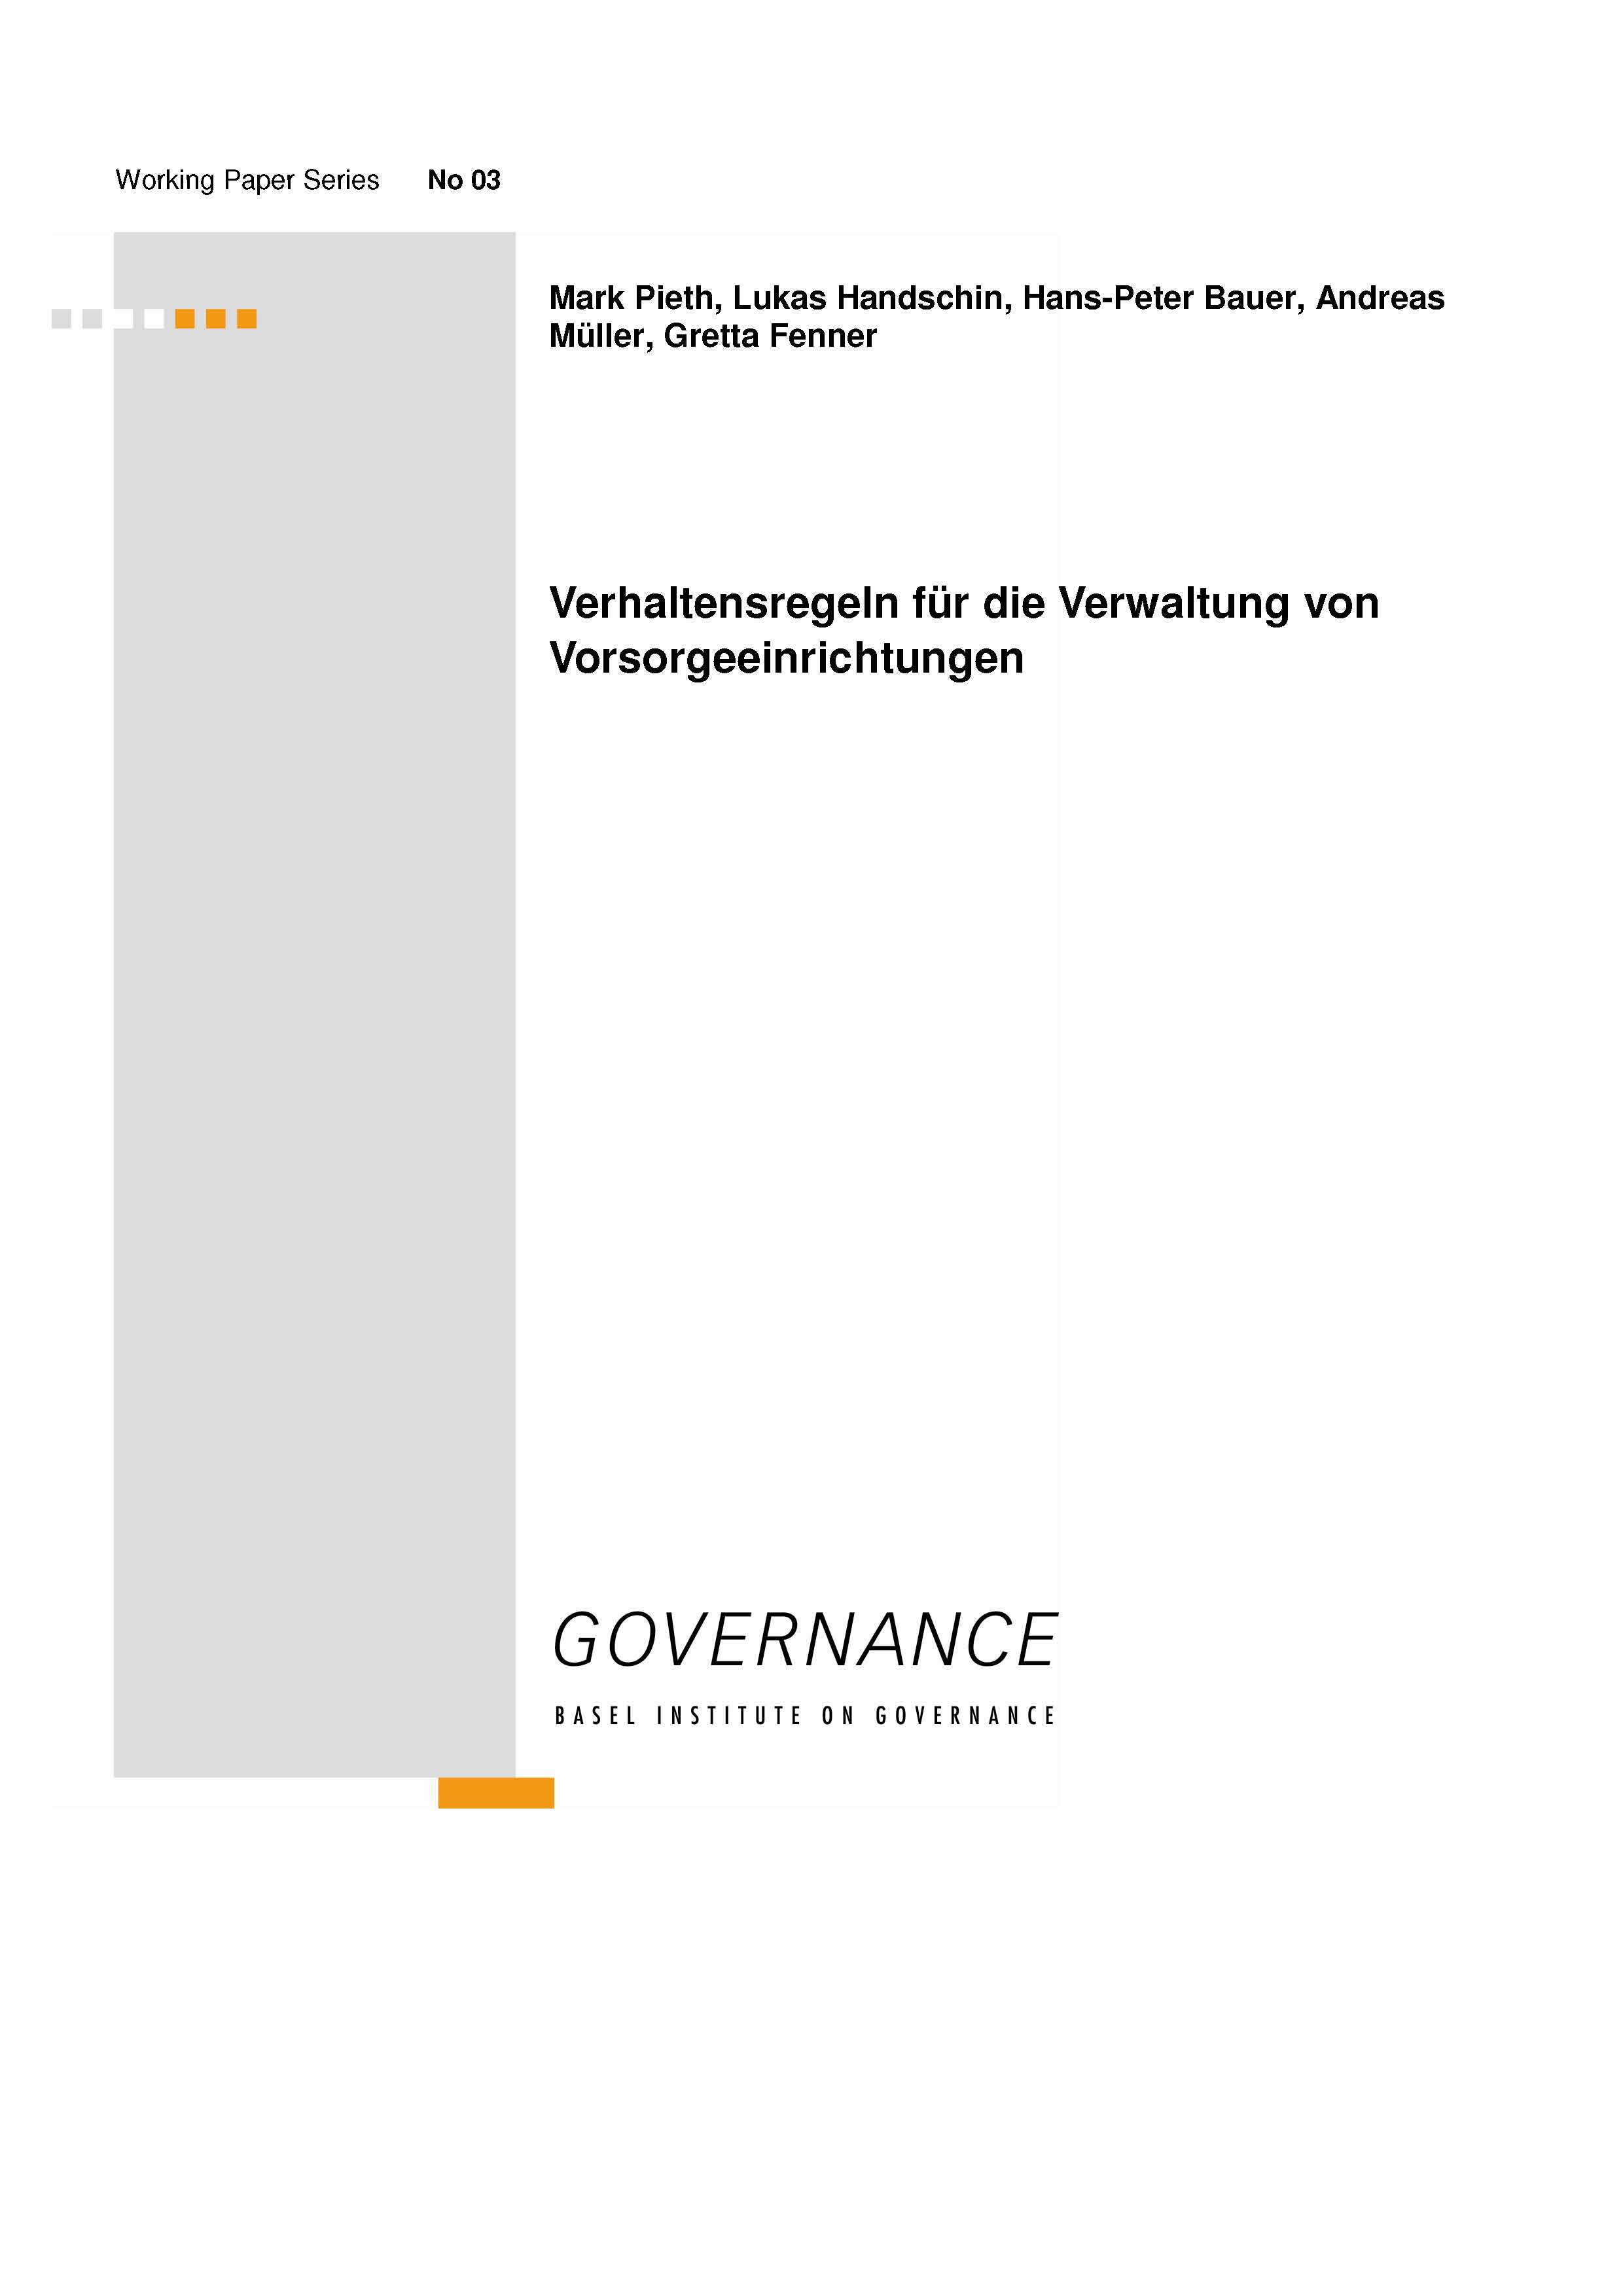 Cover page of Working Paper